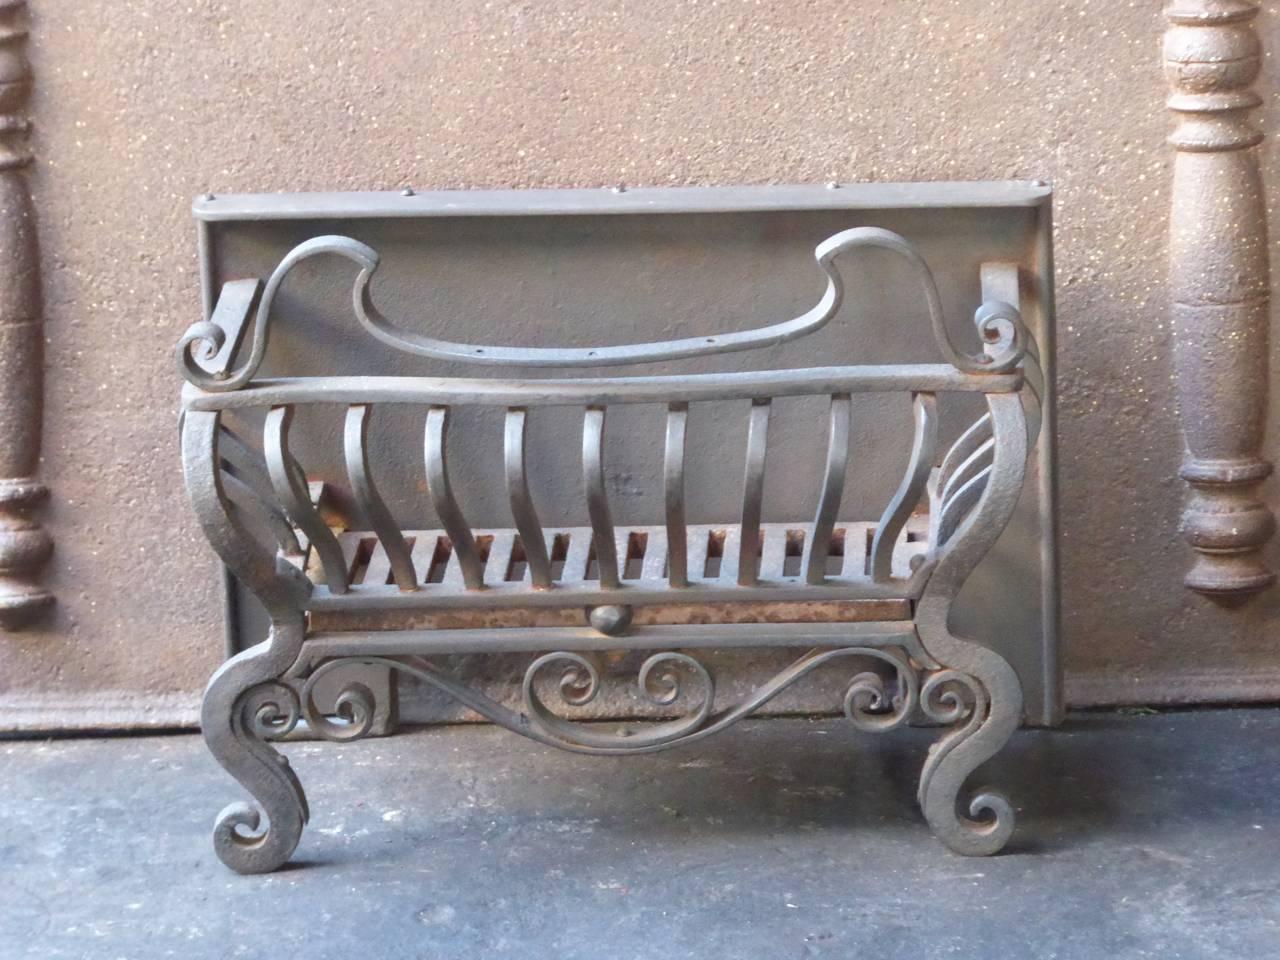 English Art Nouveau fire grate made of cast iron and wrought iron.

The condition is good.